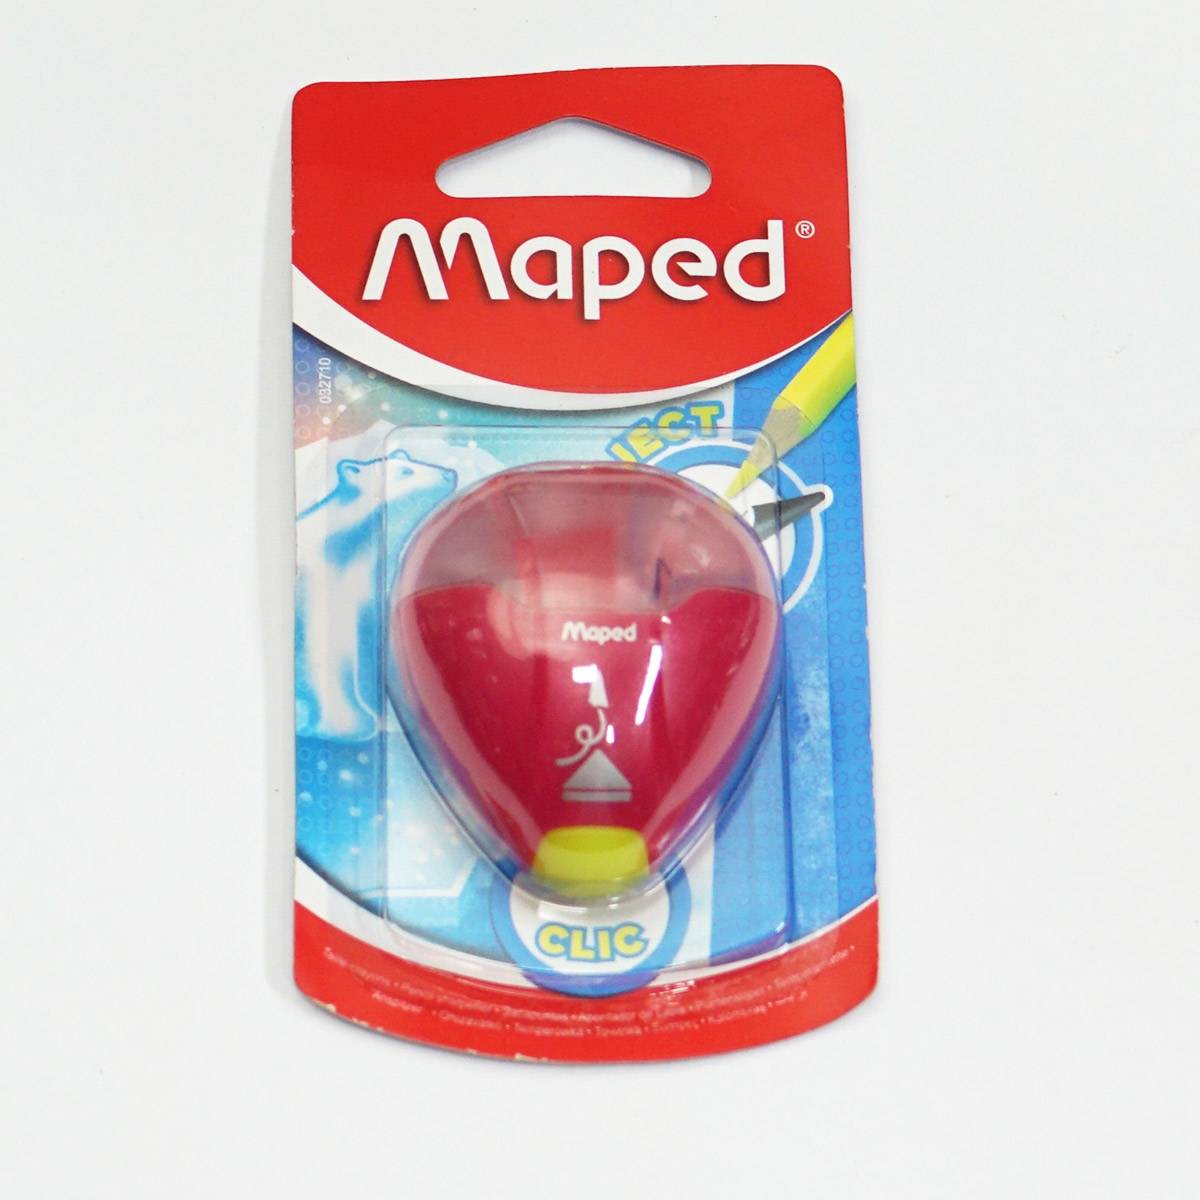 Maped 032710 Igloo Eject  Pink Color one Hole Pencil Sharpener SKU 50120